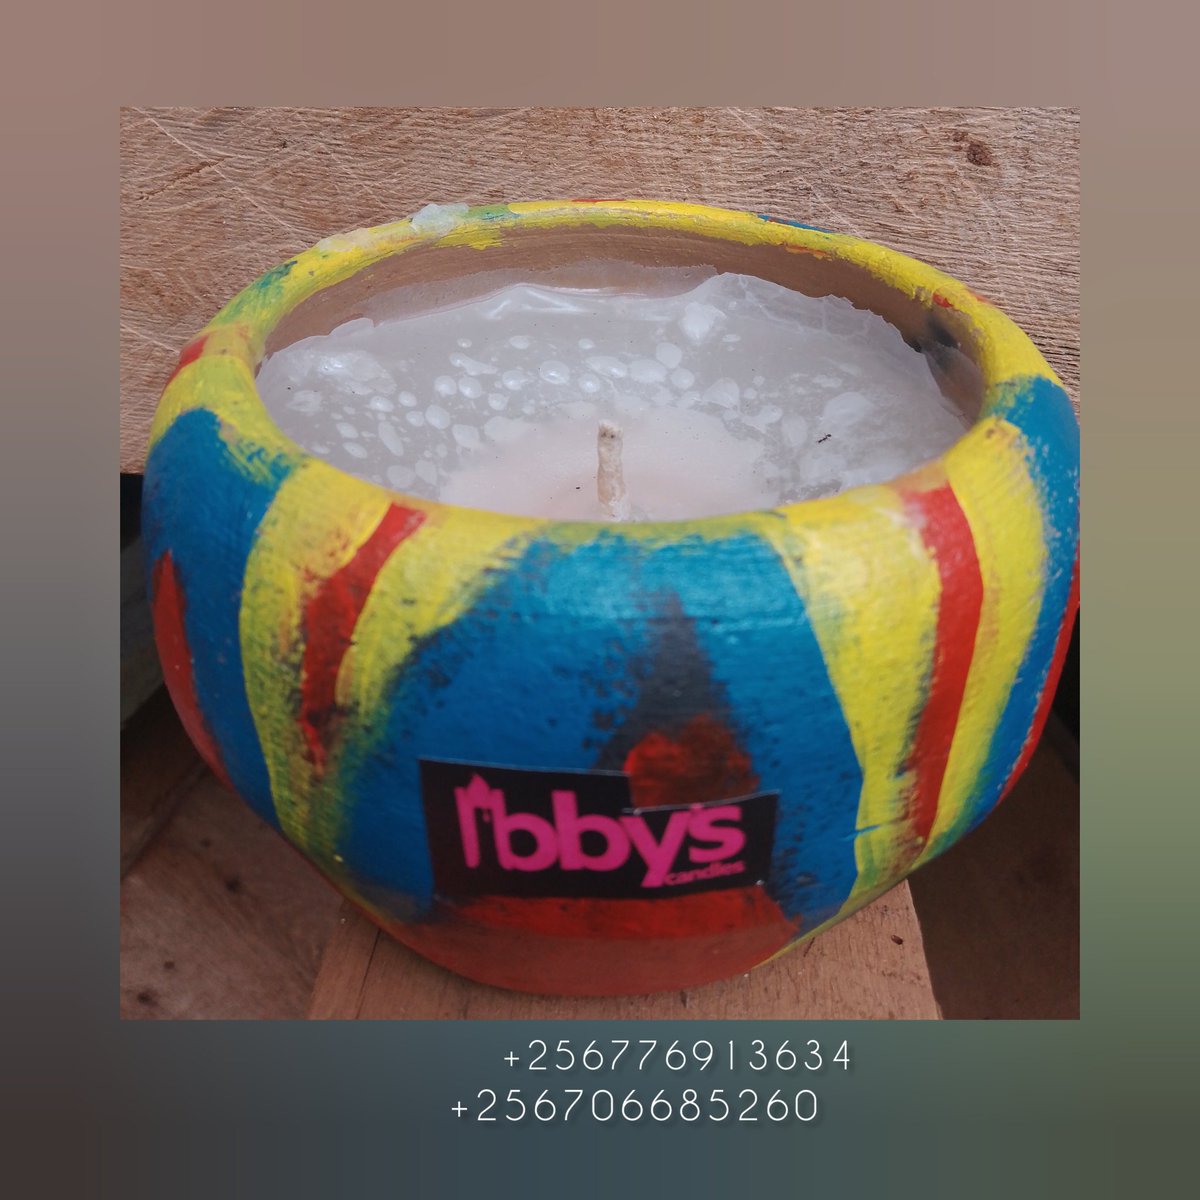 Spice up quality time at home with @Ibbys_candles 's scented candles for as low 35k.
They are scented with bubblegum, strawberry and a repellant for mosquitoes & houseflies.
📞+256706685260 or +256776913634.

📍 Rootsyard Najjera